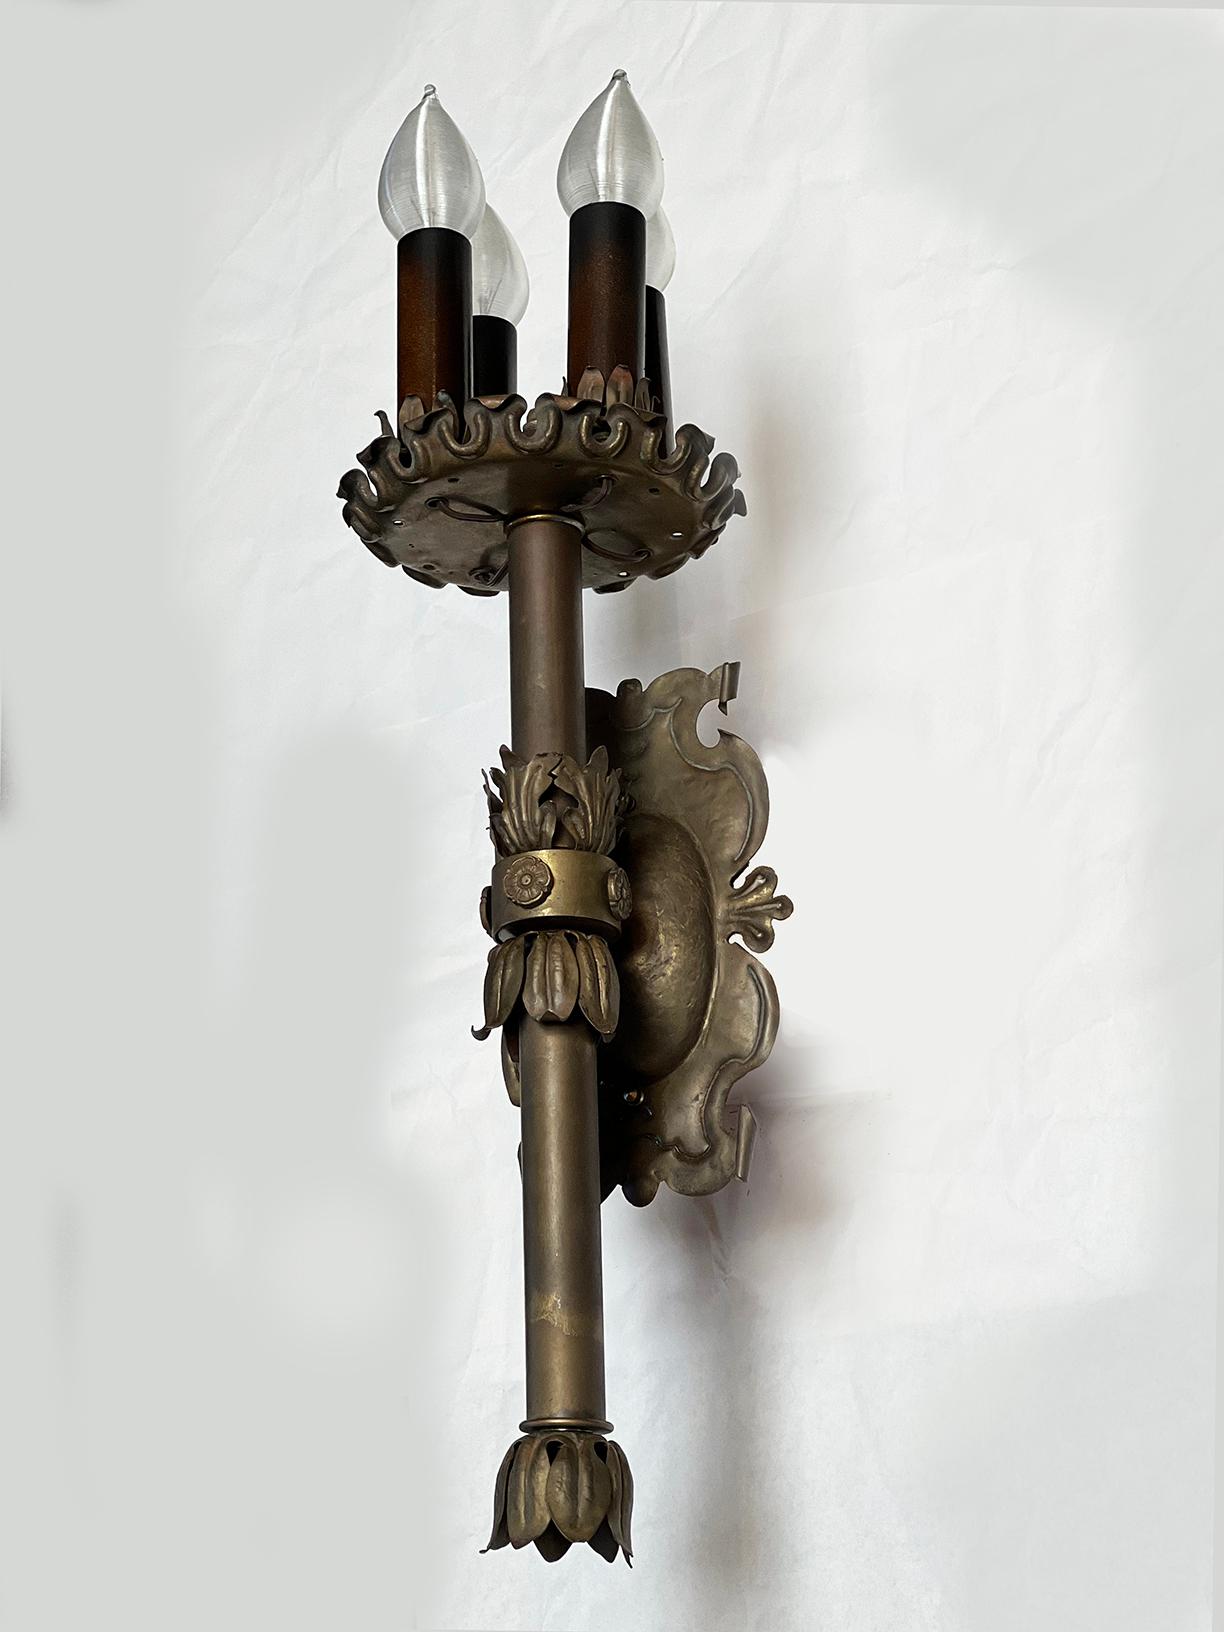 Century old brass wall sconce completely rewired with UL certified parts. Usually seen in iron, this ornate masterpiece is created out of pressed brass, aged to perfection. 4 x 60 watts. Silicone wrap bulbs included in final sale of this